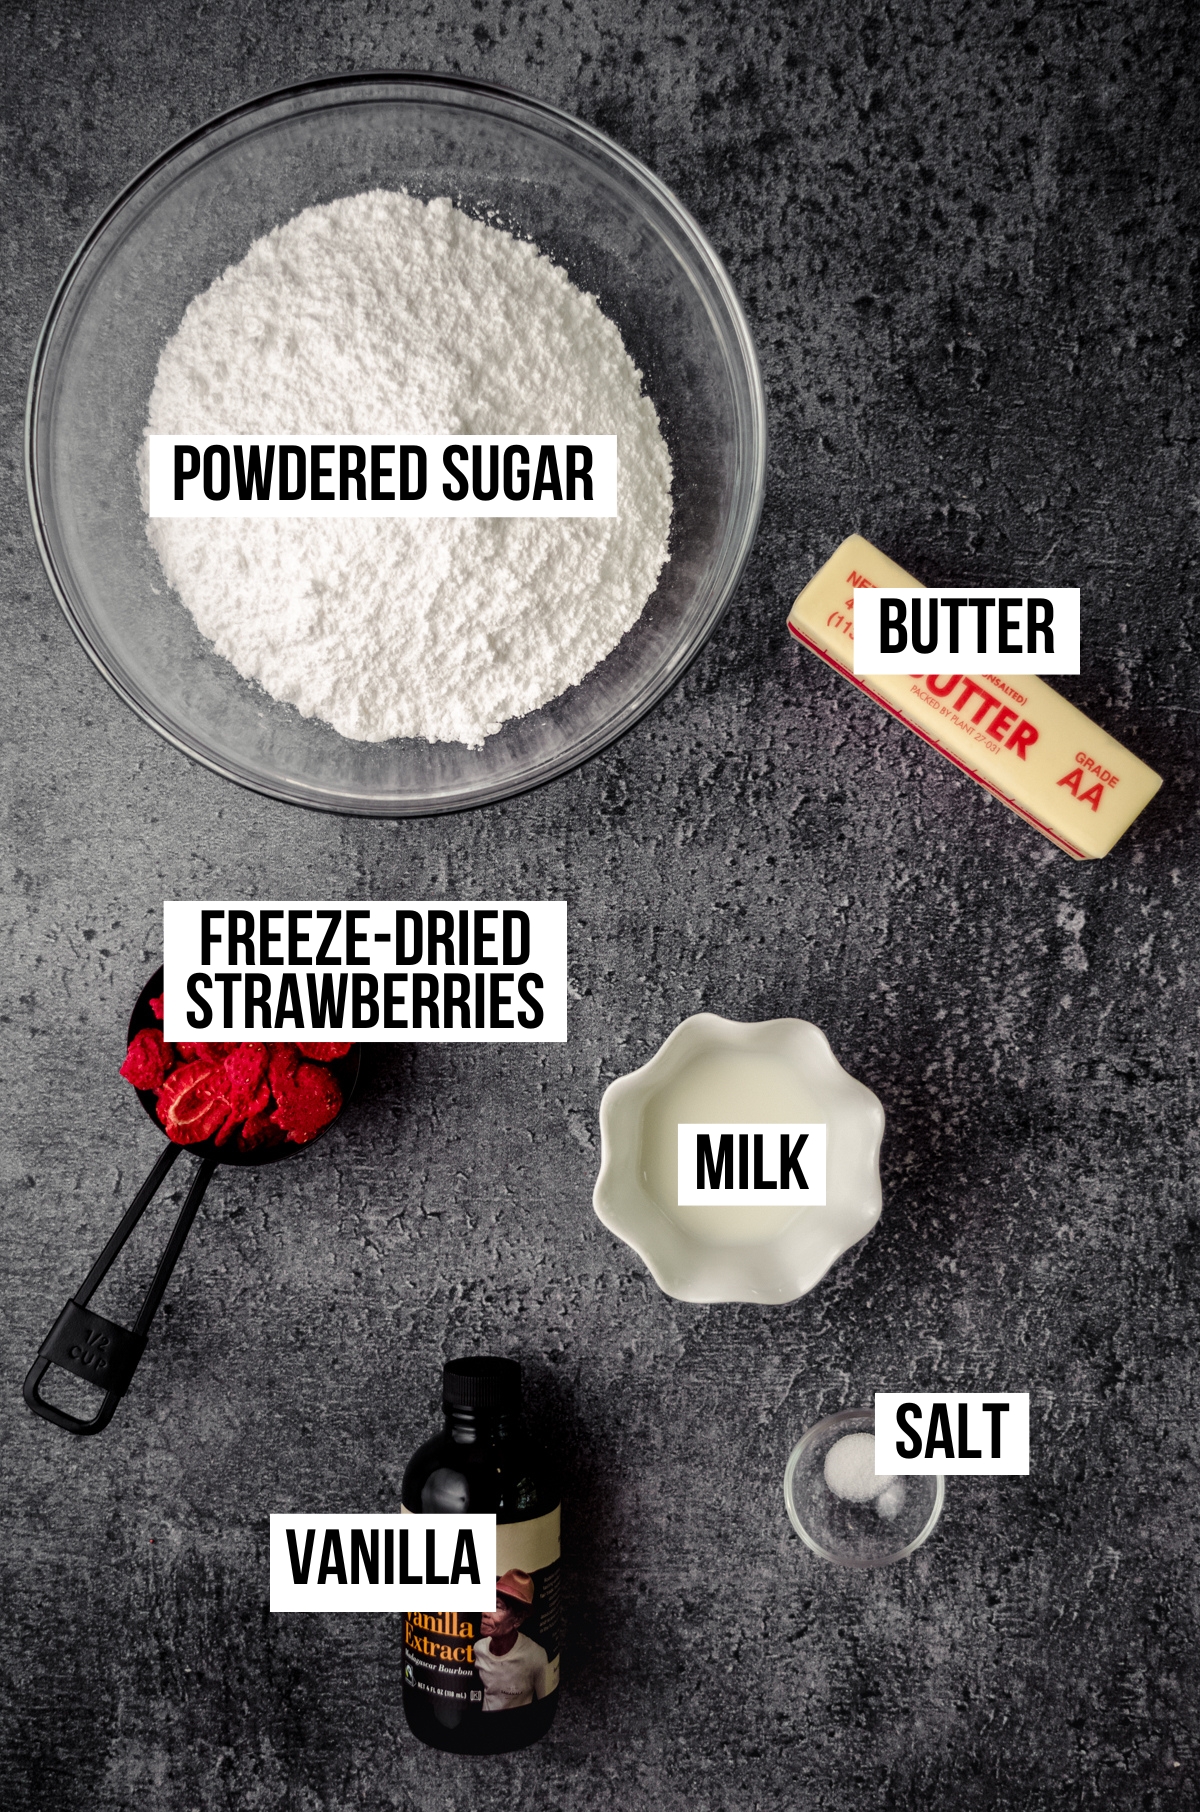 Aerial photo of ingredients for strawberry buttercream with text overlay.